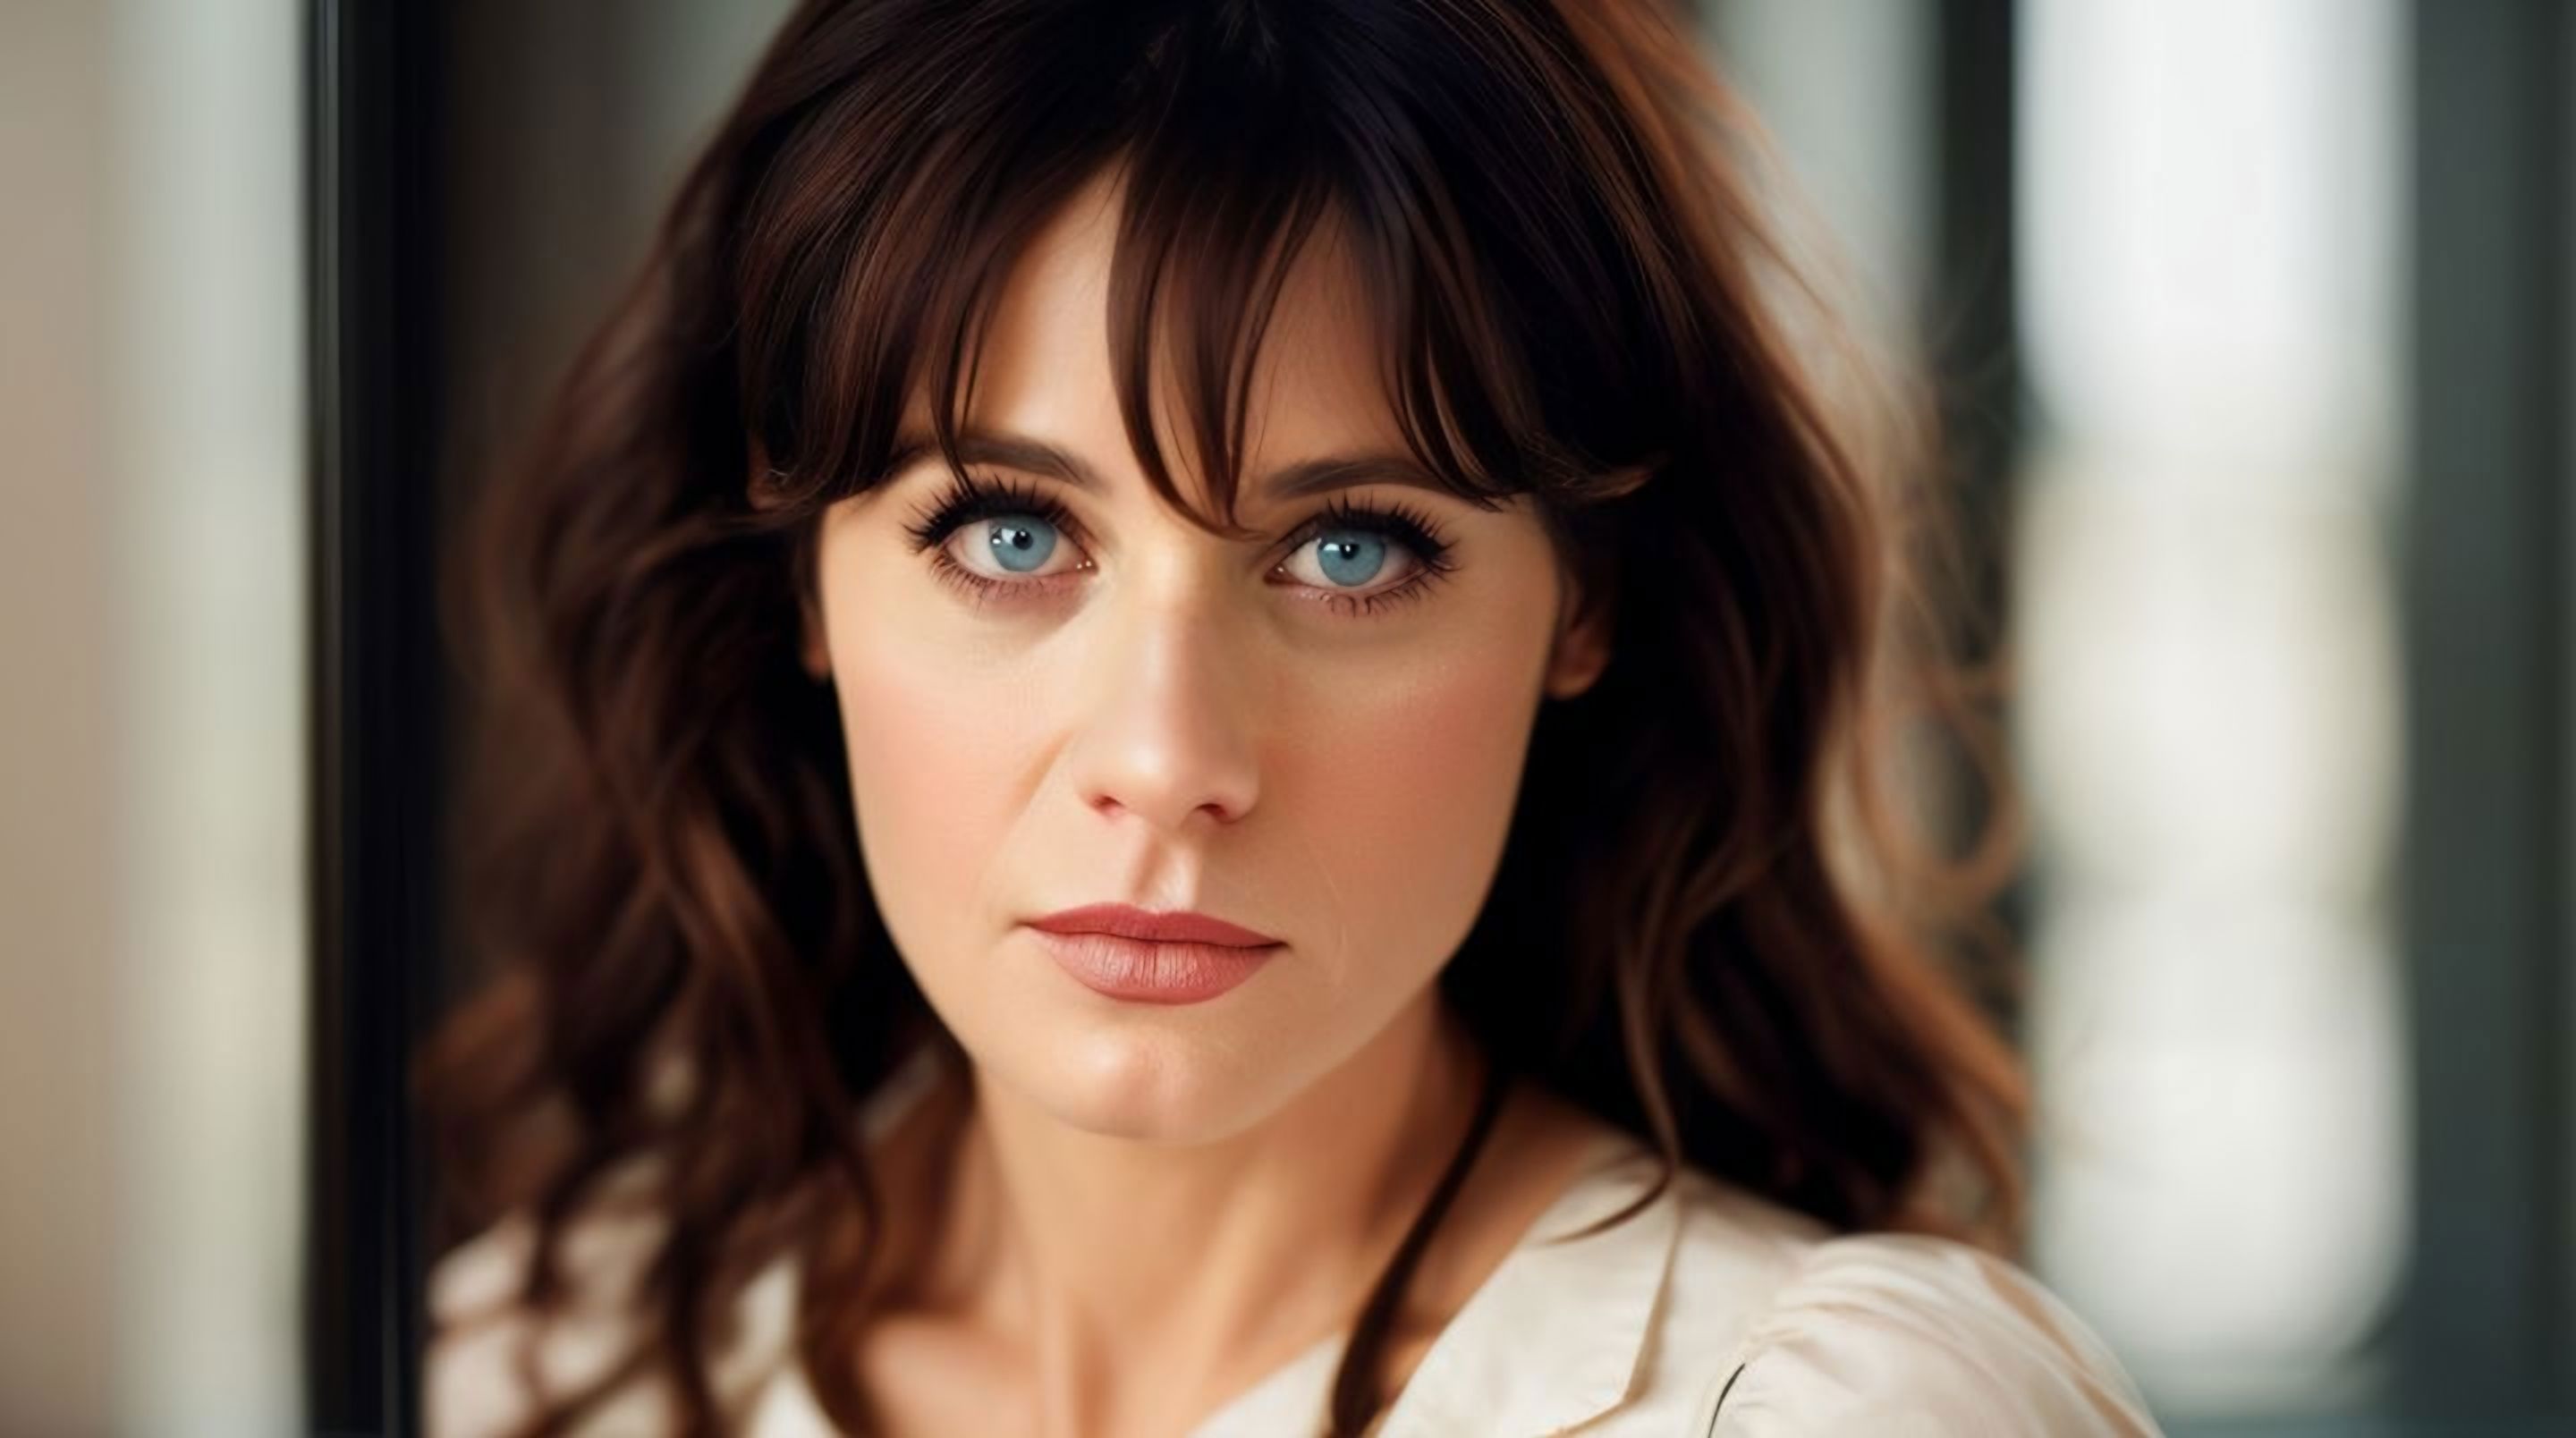 Zooey Deschanel image by TheLoraCollective